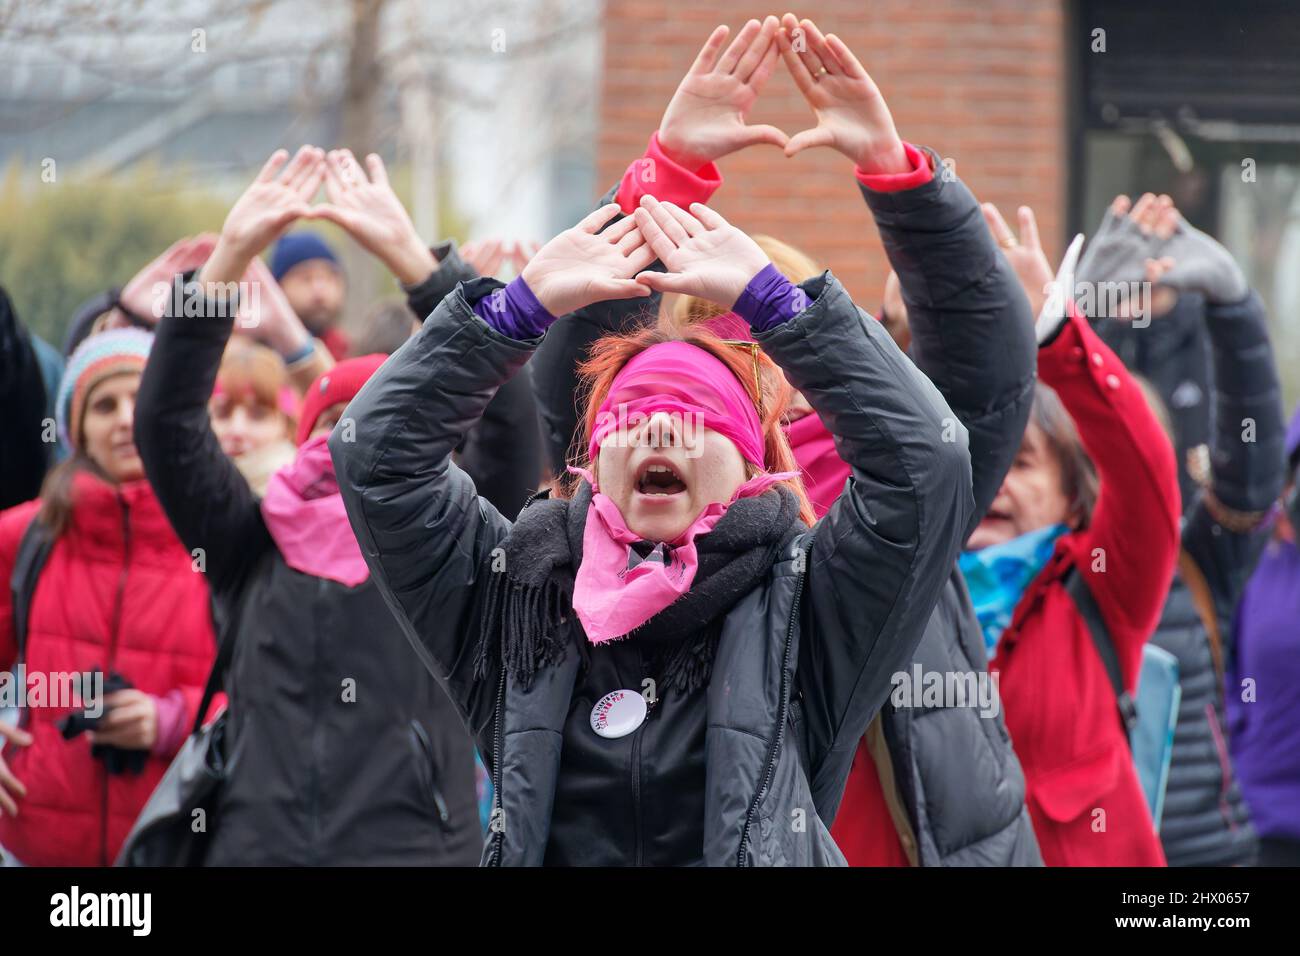 Turin, Italy. 8th Mar, 2022. Activists of the Non Una Di Meno transfeminist movement strike on International Women's Day and demonstrate against sexist violence and the high number of femicides in Italy while making vagina sign. Credit: MLBARIONA/Alamy Live News Stock Photo